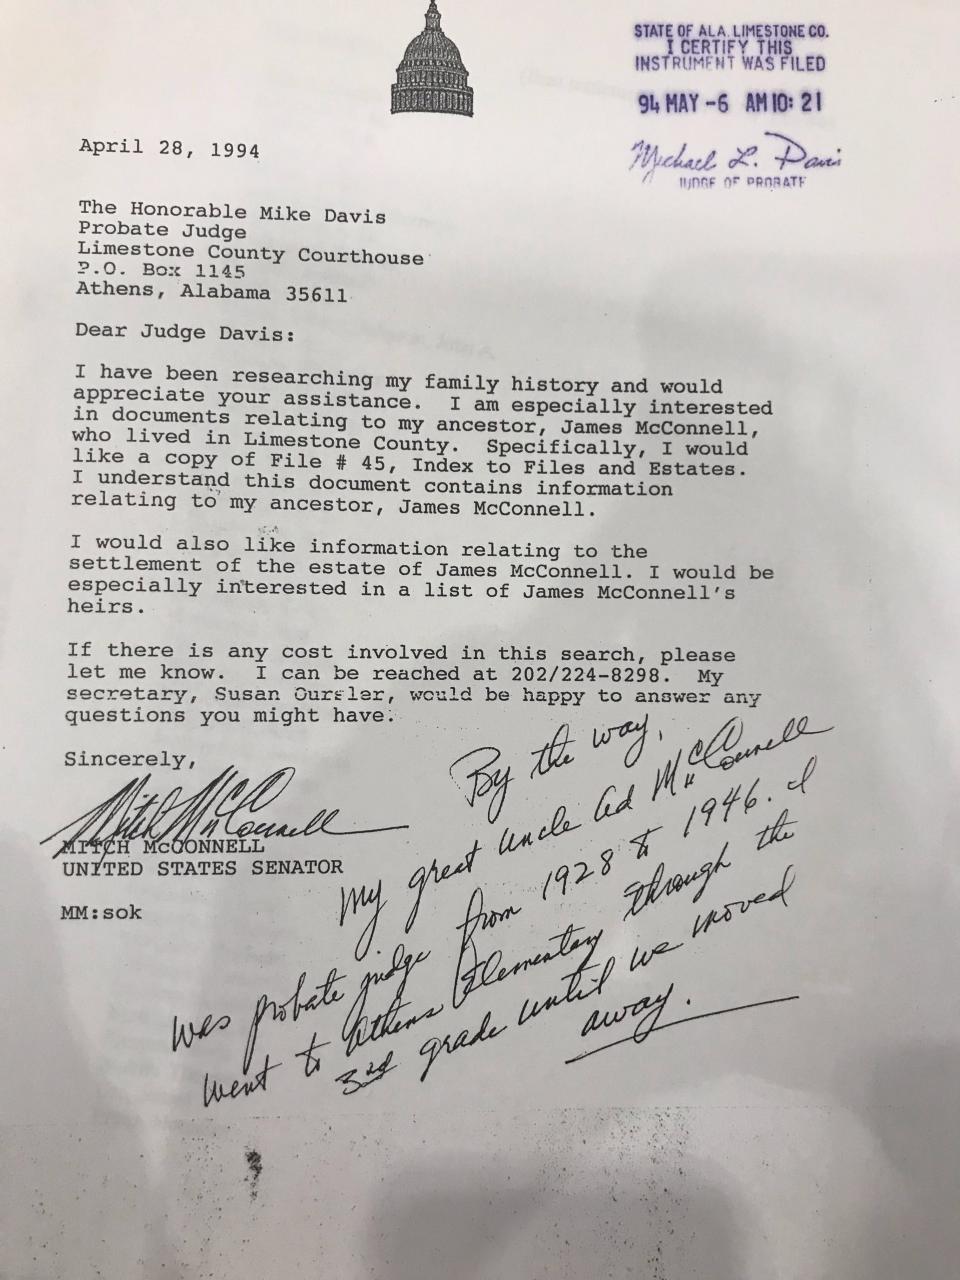 Sen. Mitch McConnell wrote a letter in 1994 requesting records about his family history that included information about the slaves they owned.